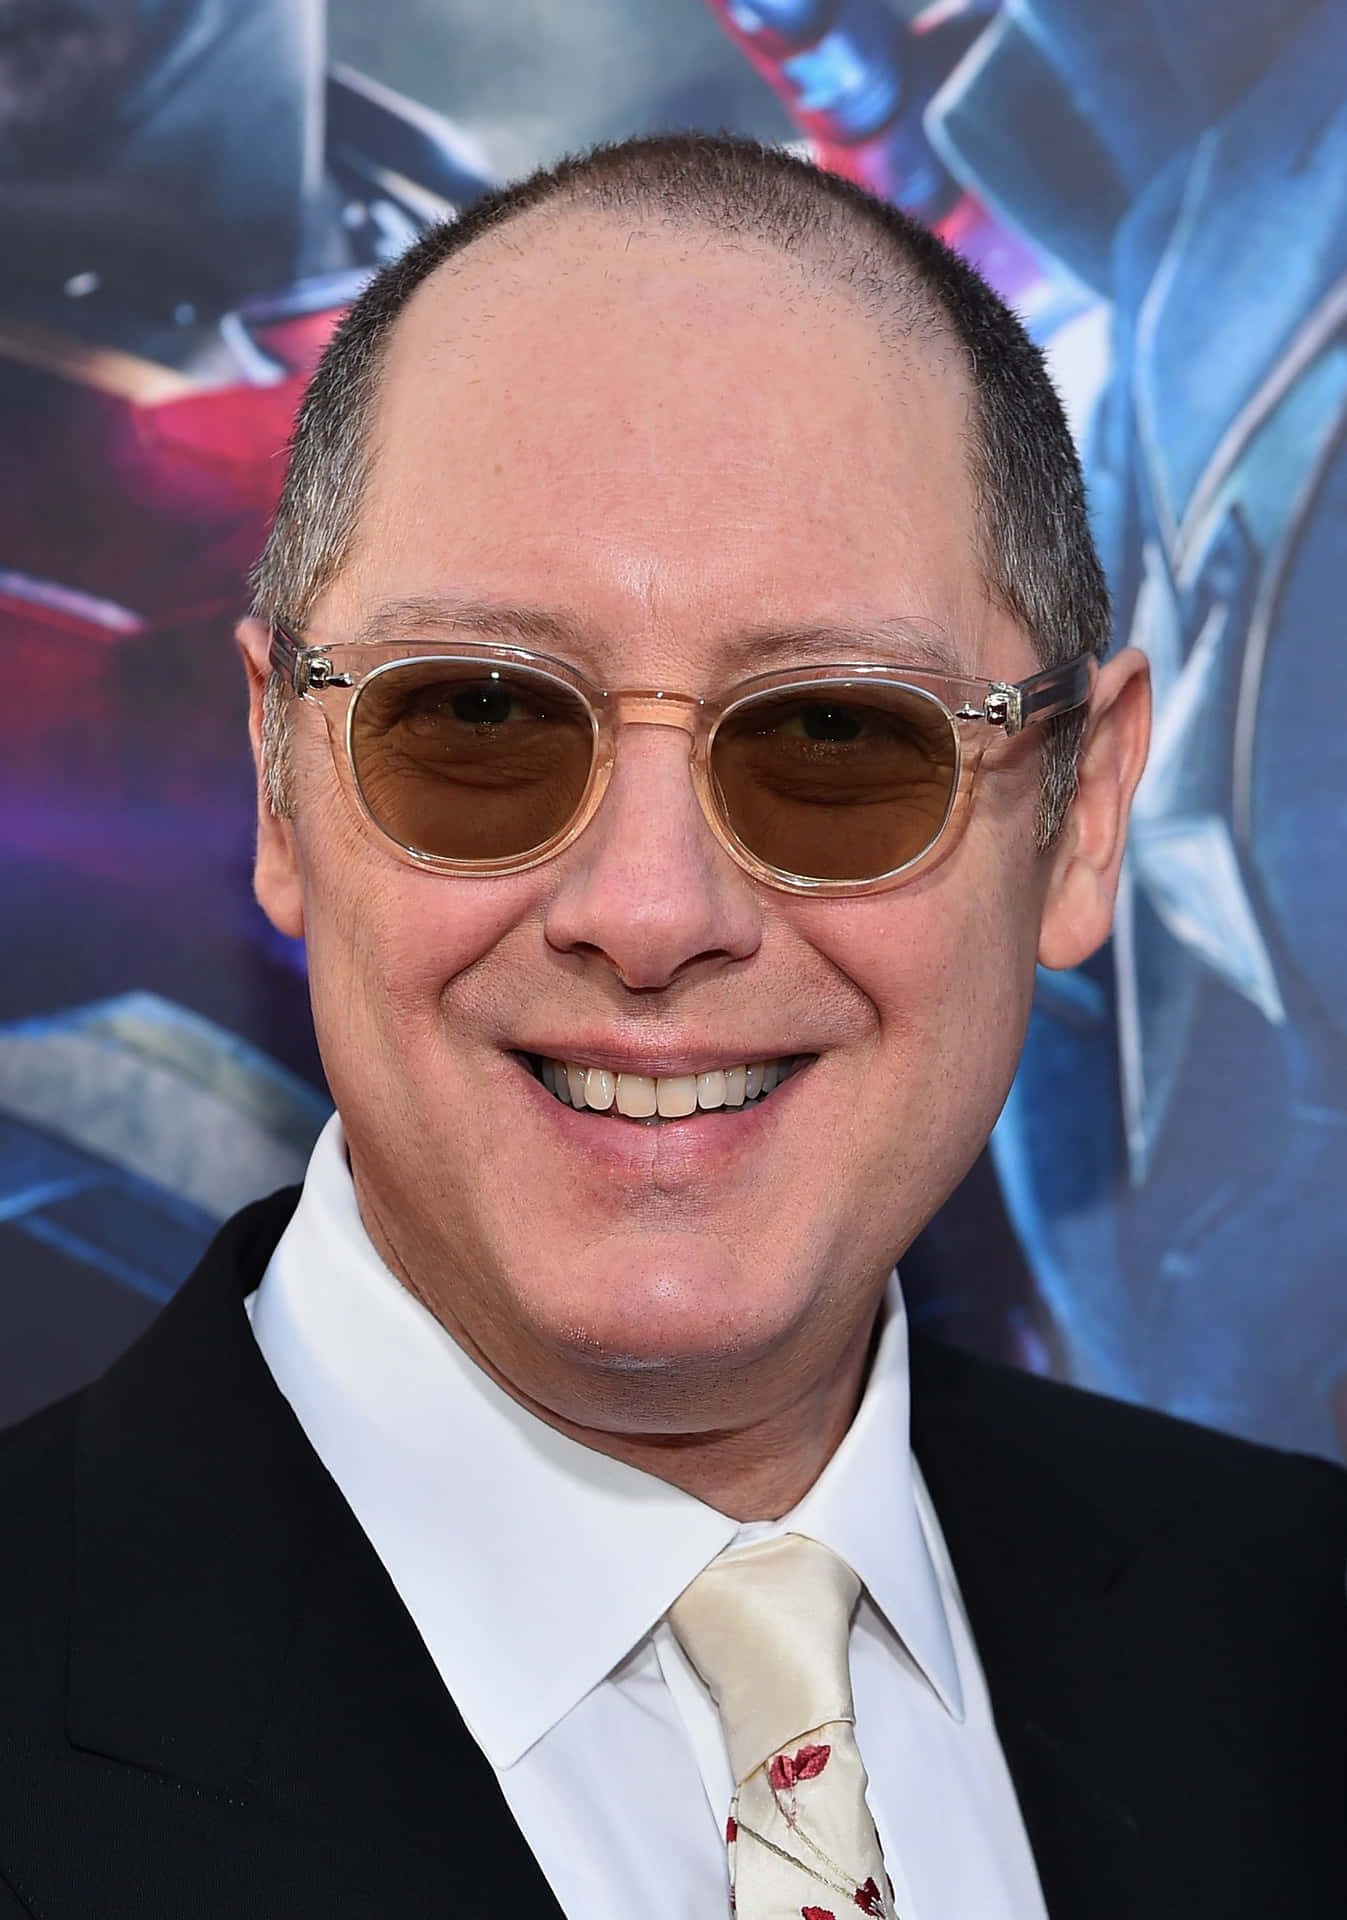 Jamesspader (this Does Not Require Translation As It Is A Name And Can Be Used As It Is In Spanish.) Fondo de pantalla